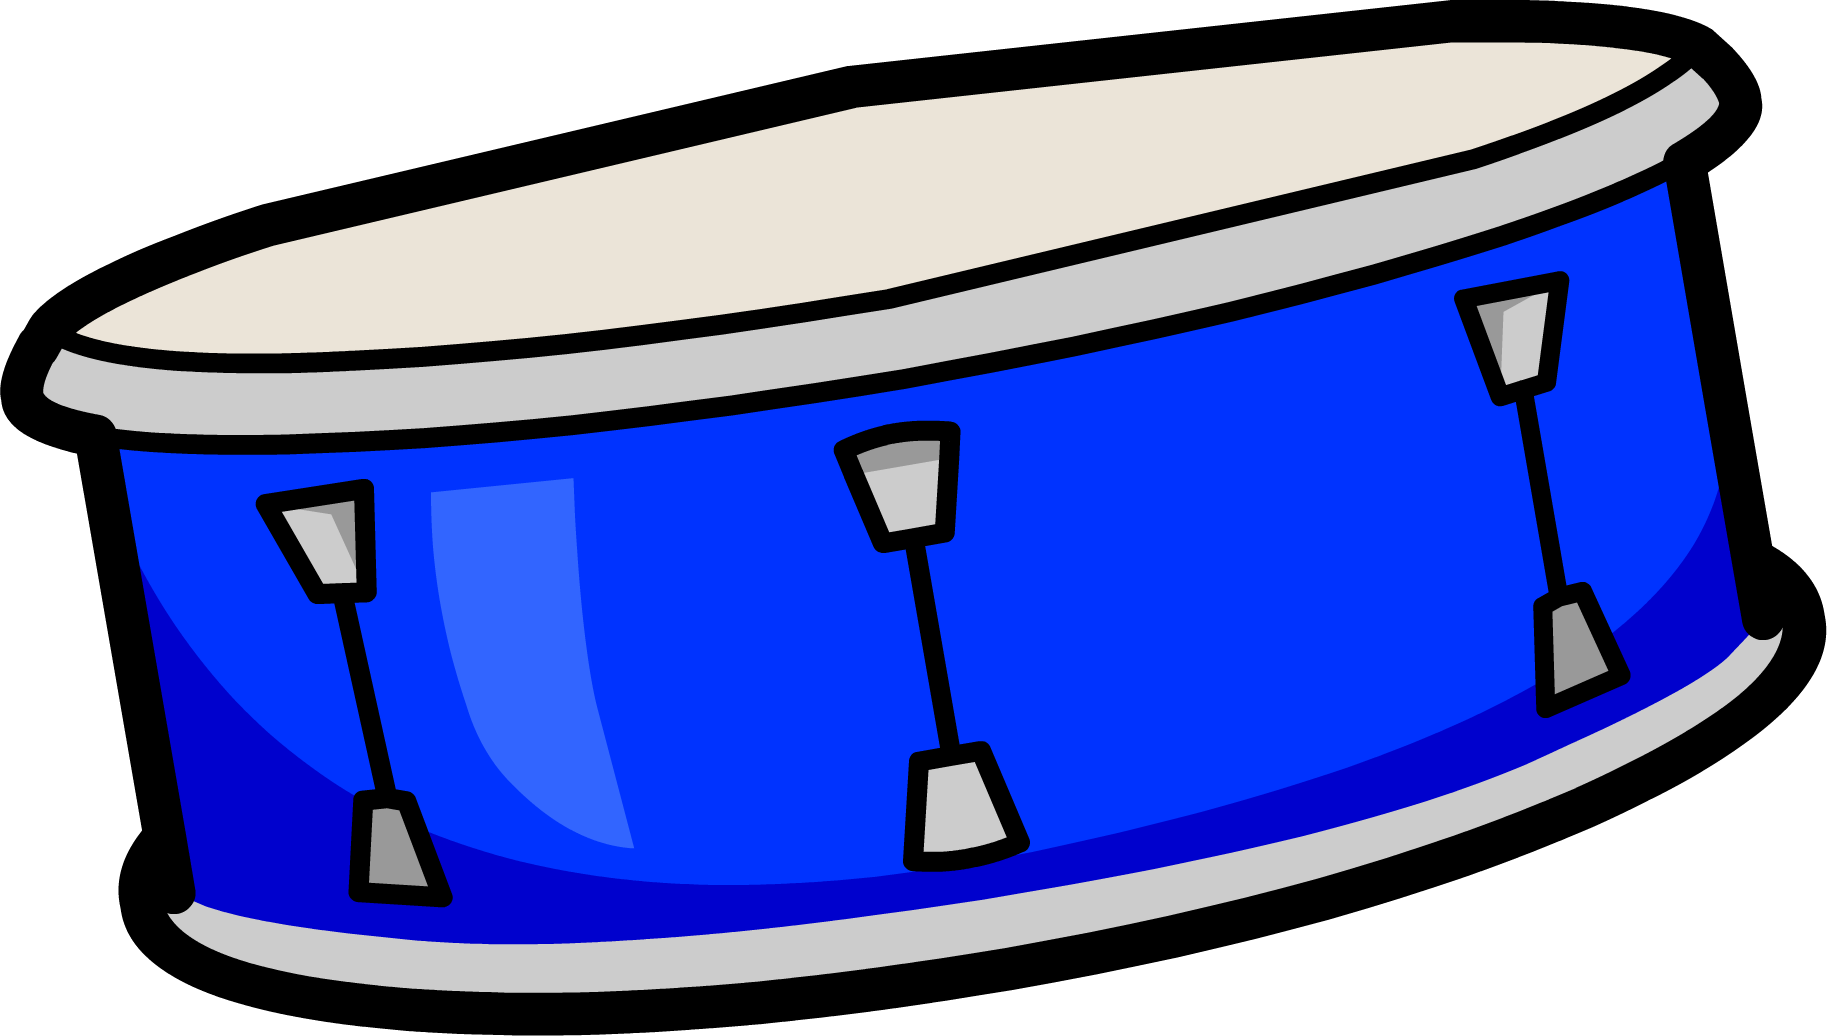 Blue Snare Drum Cartoon PNG